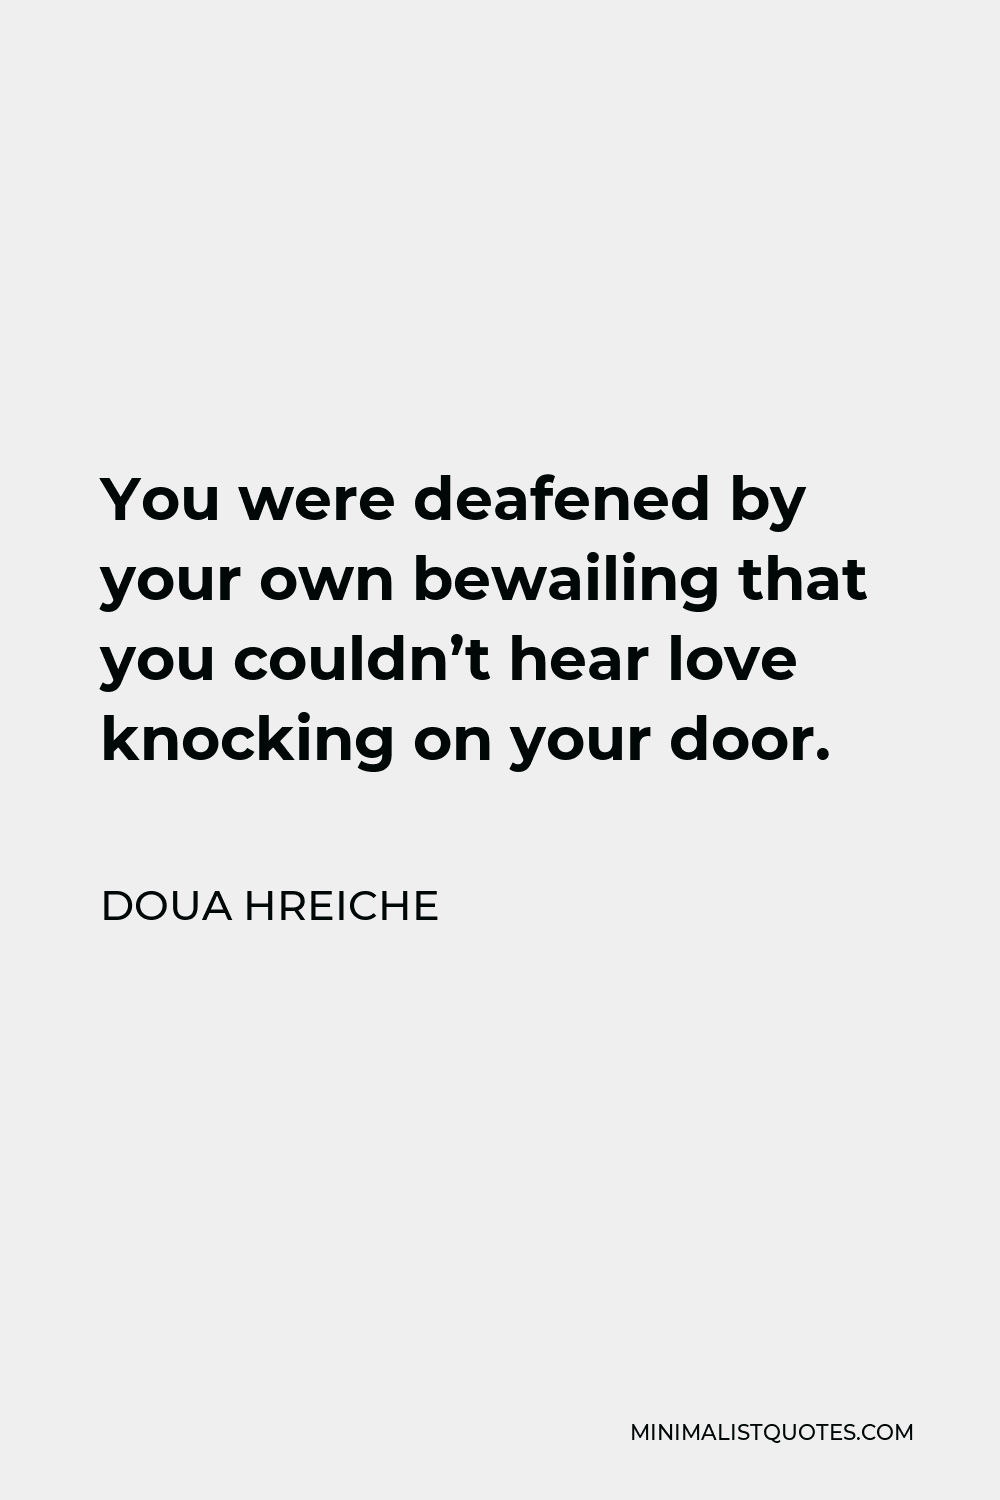 Doua Hreiche Quote - You were deafened by your own bewailing that you couldn’t hear love knocking on your door.